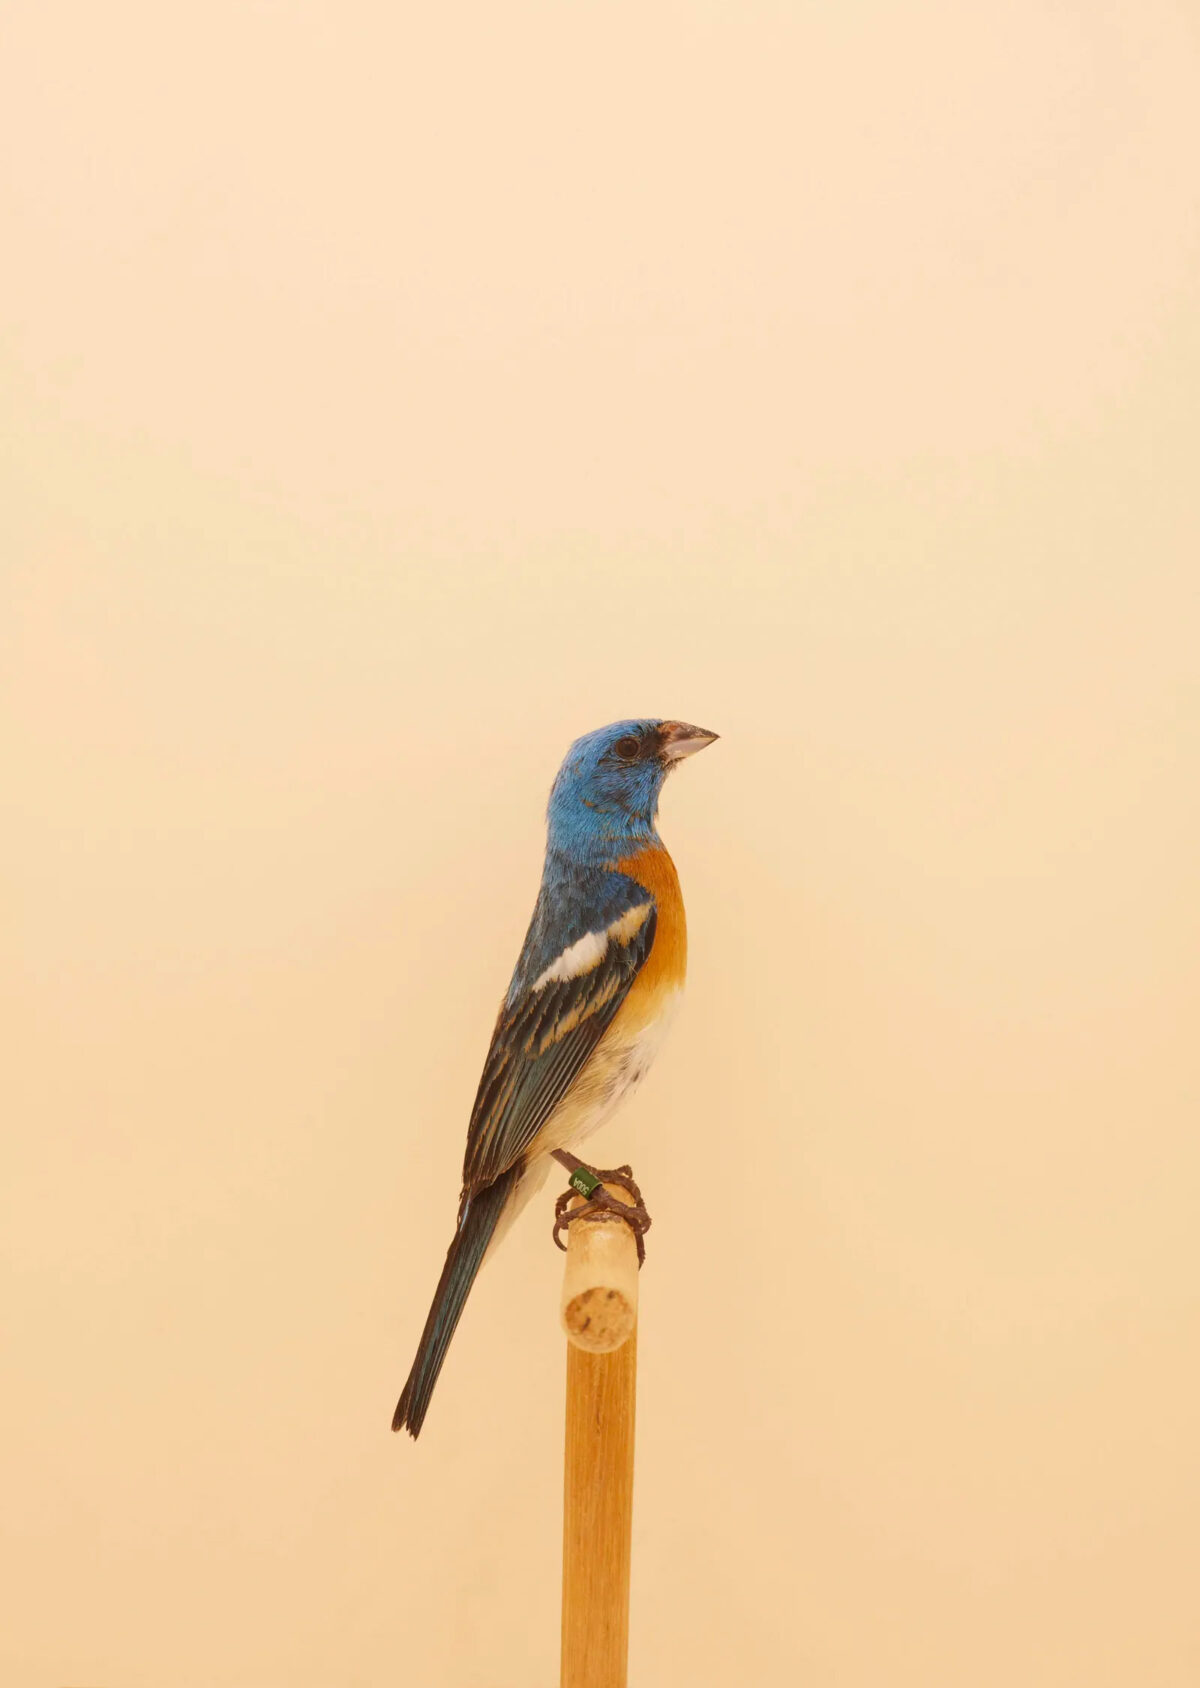 An Incomplete Dictionary Of Show Birds A Minimalist Bird Photography Series By Luke Stephenson (15)